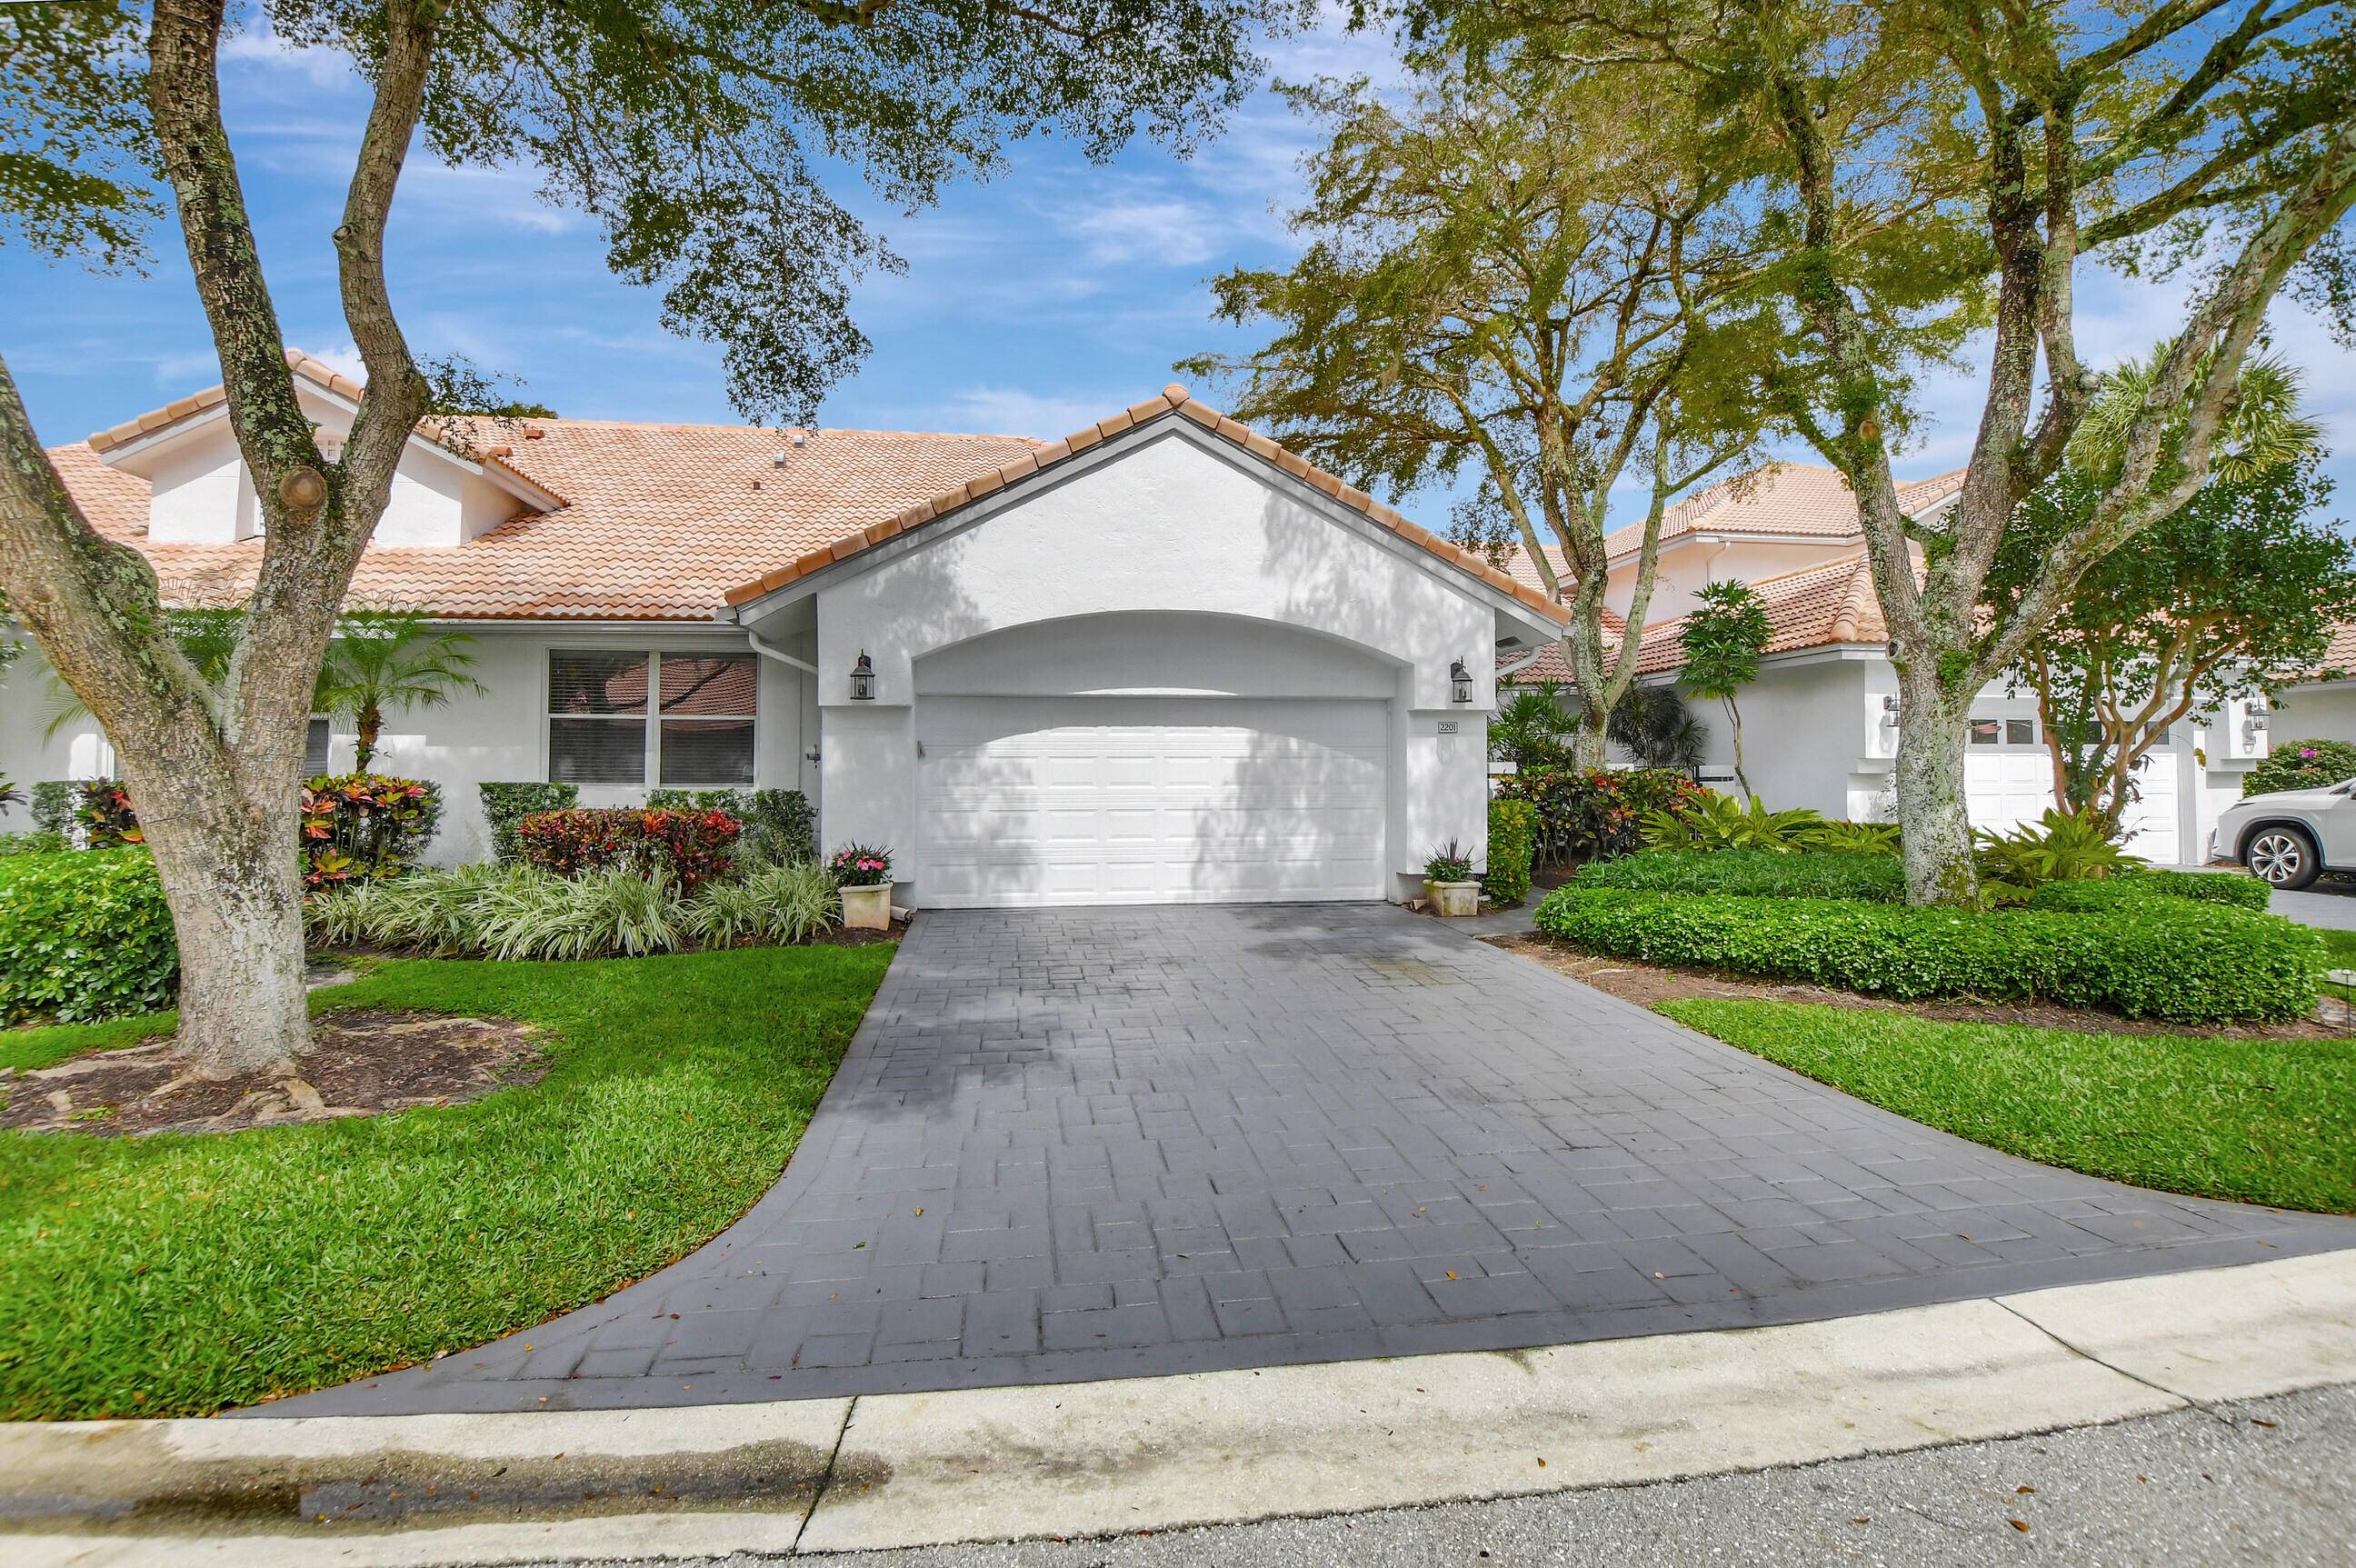 Introducing this meticulously maintained 3 bedroom, 2 bathroom single story villa, bathed in sunlight and offering serene golf course vistas with a screened in patio.